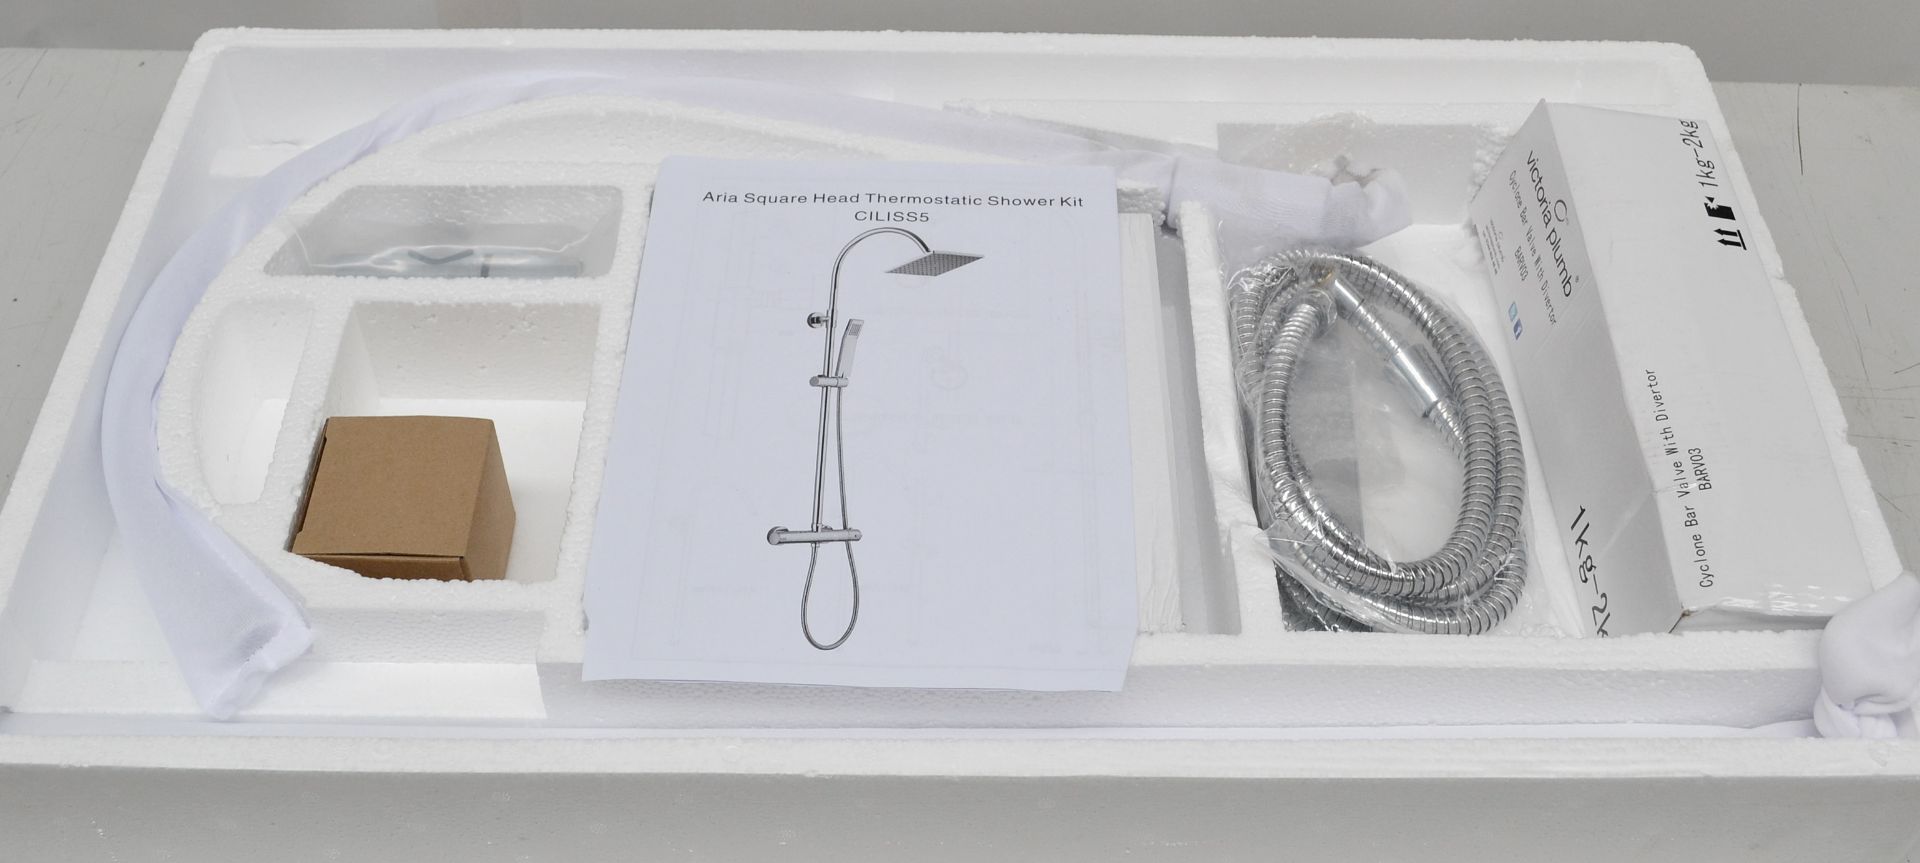 1 x ARIA Square Head Thermostatic Shower Kit - Chrome - CILISS5 - Ref: MBI003 - CL190 - Location: - Image 5 of 12